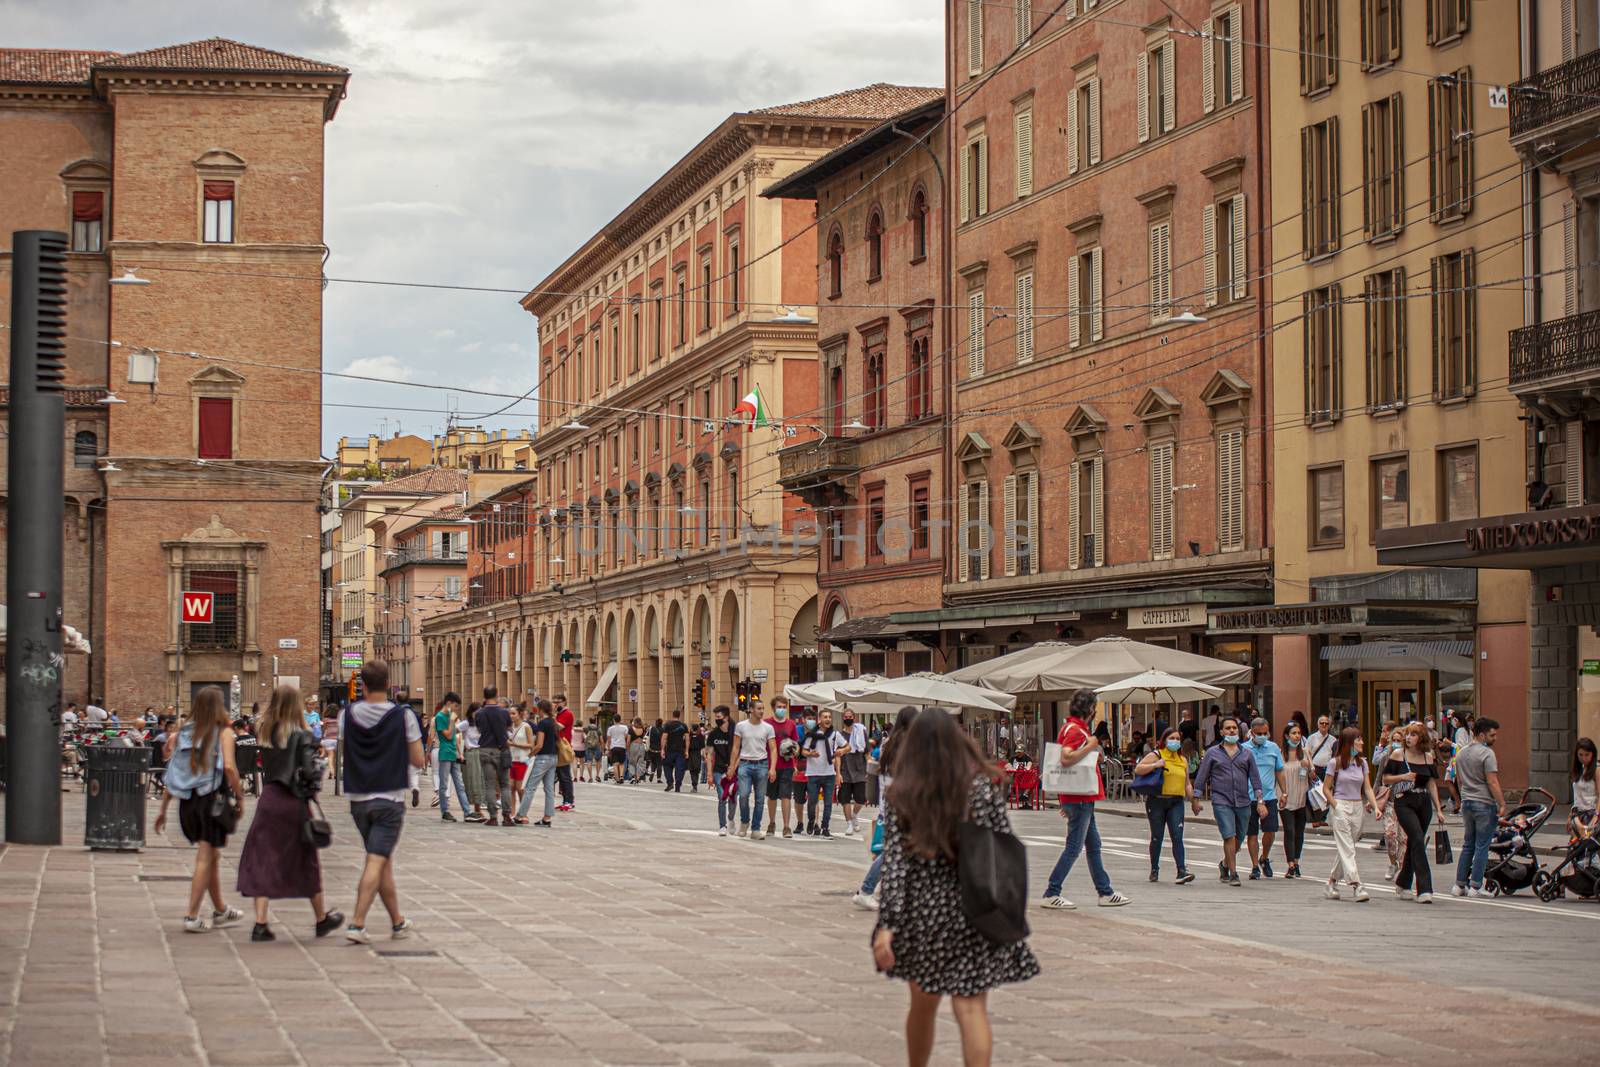 People in Bologna 3 by pippocarlot